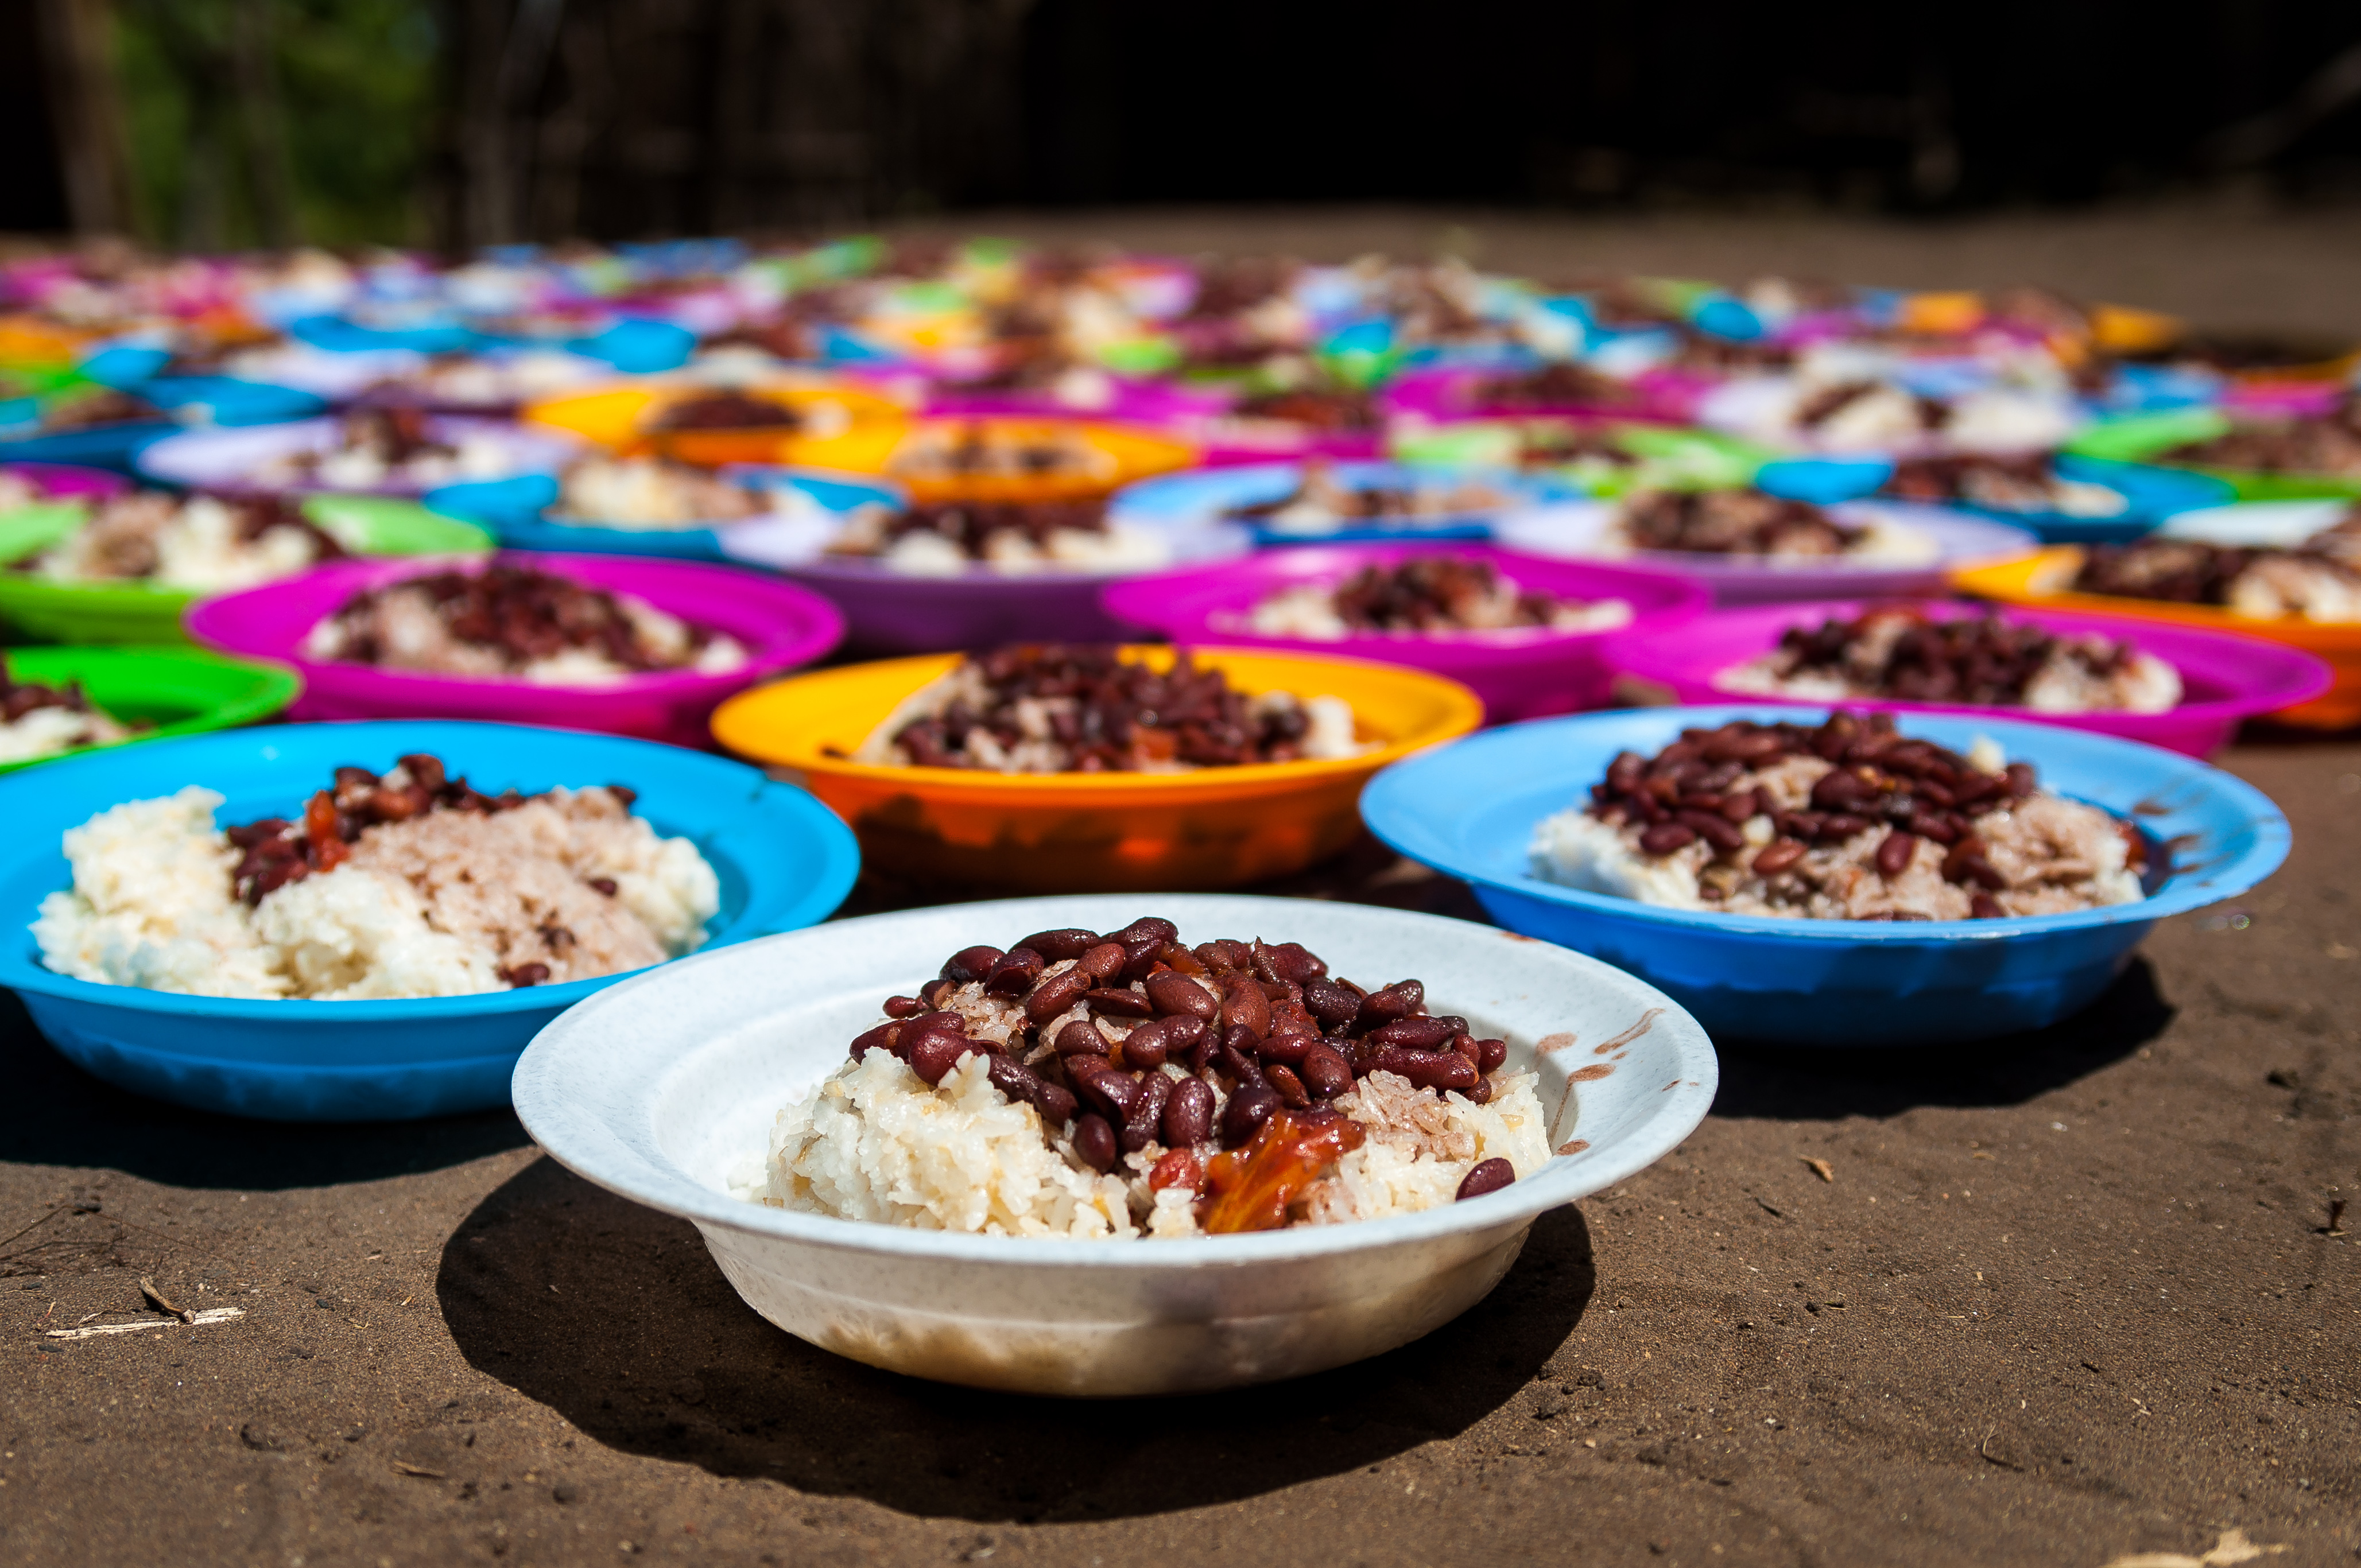 During the last day of the exam each student received a heaping plate of rice and beans.